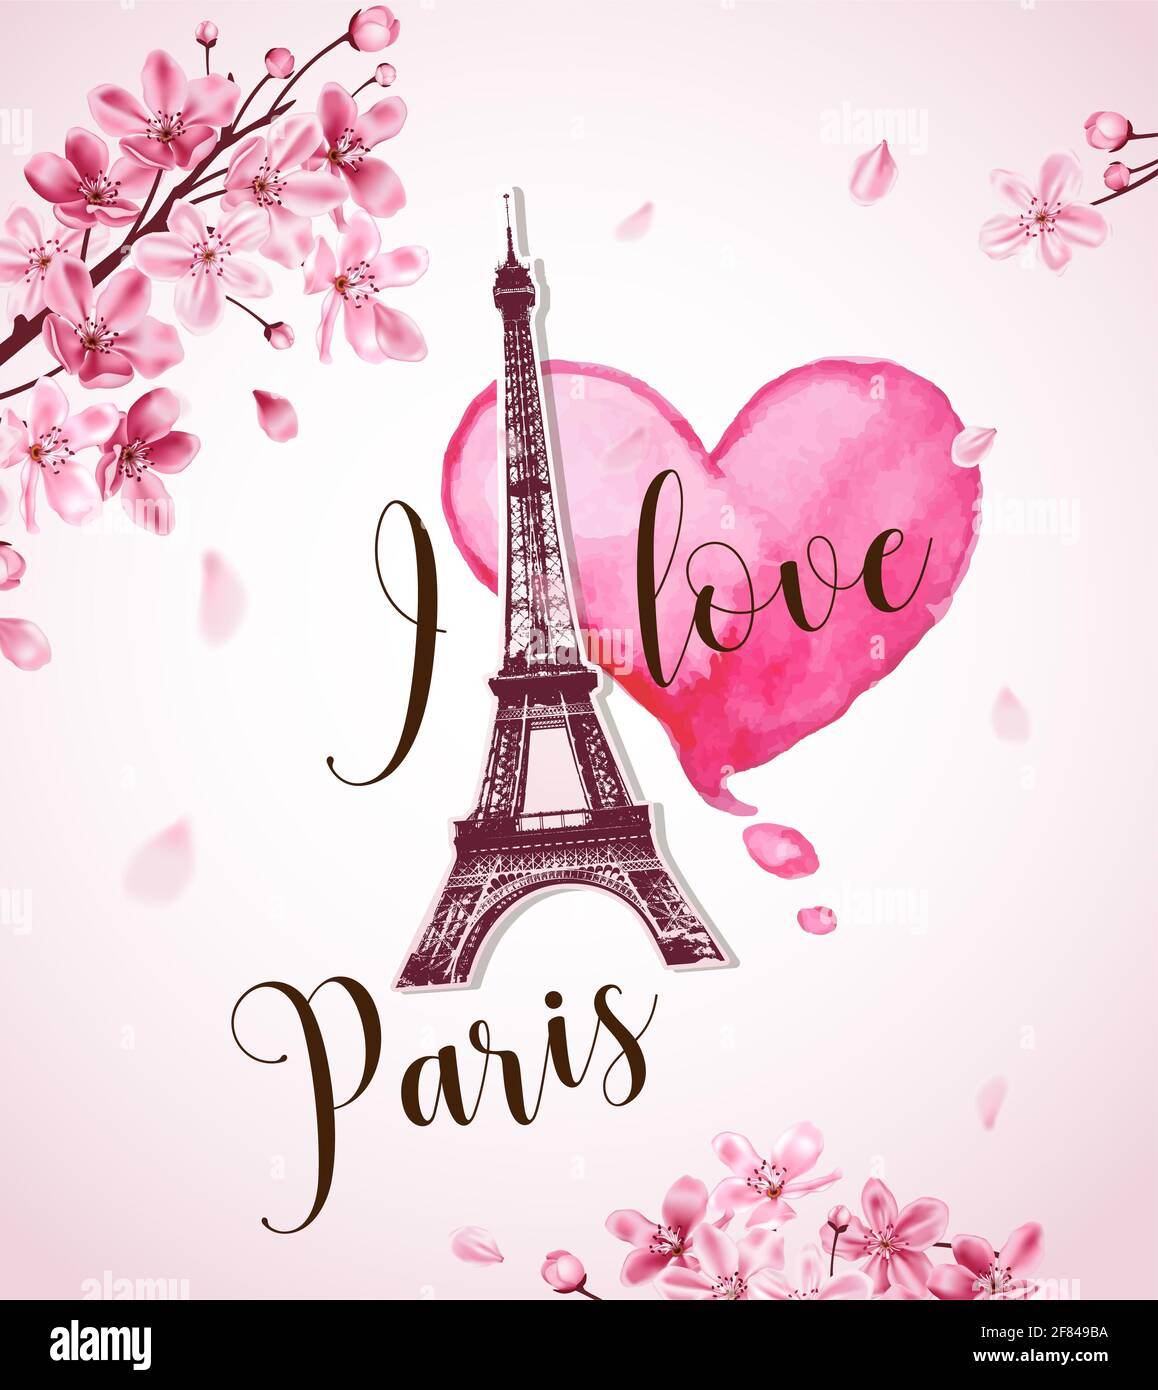 Romantic Valentine background with red watercolor heart, Eiffel Tower and flowering cherry branch Stock Photo